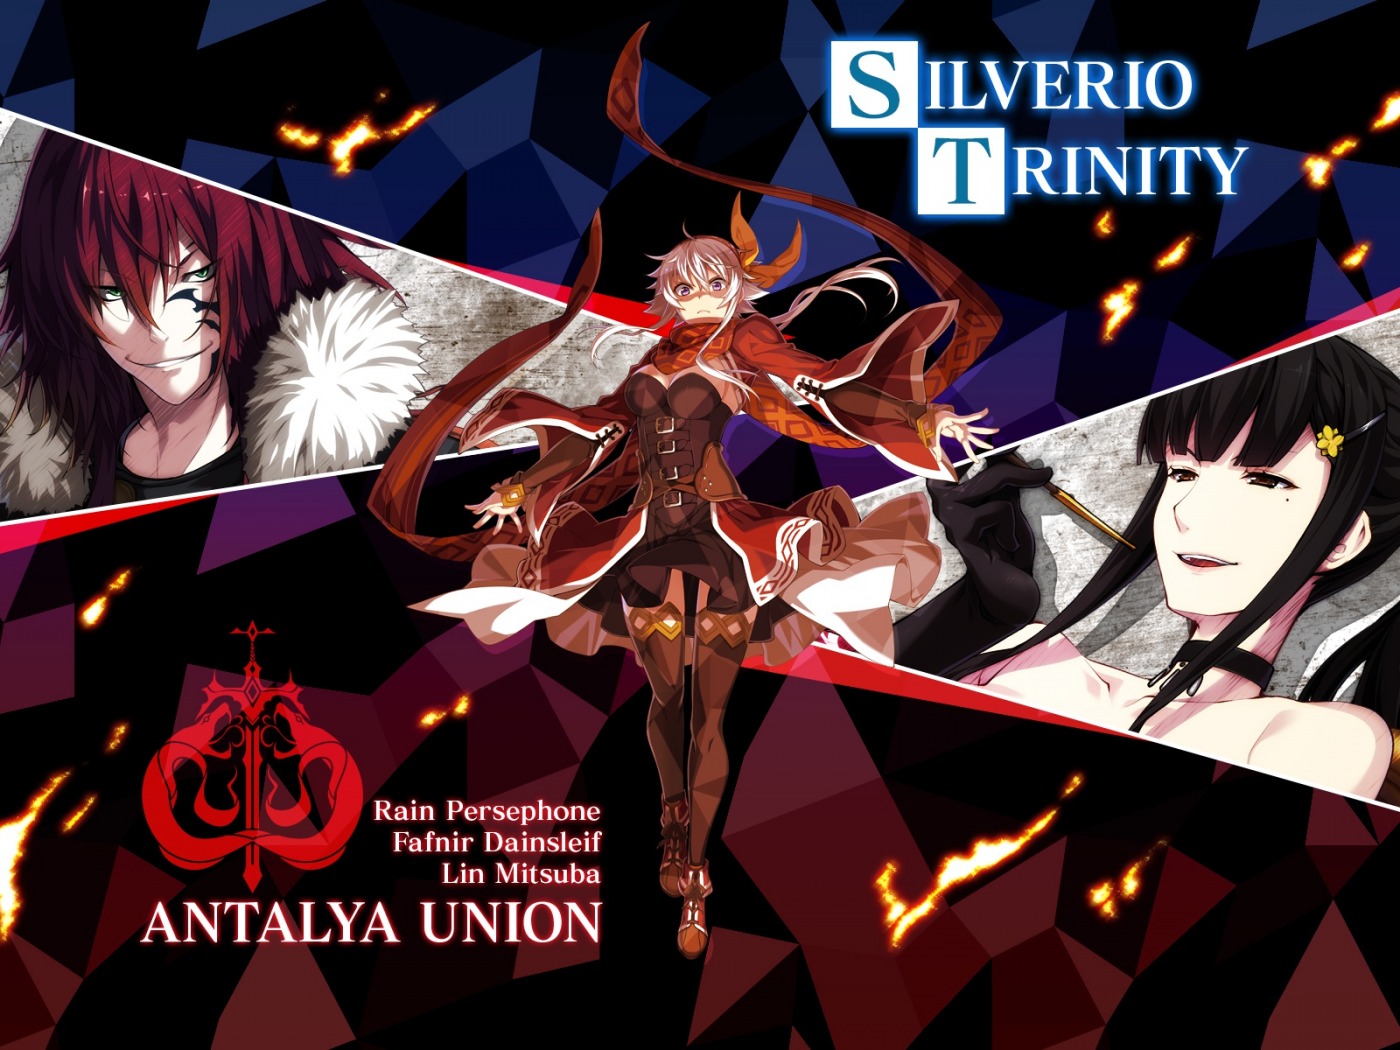 HQ Silverio Trinity Wallpapers | File 325.61Kb